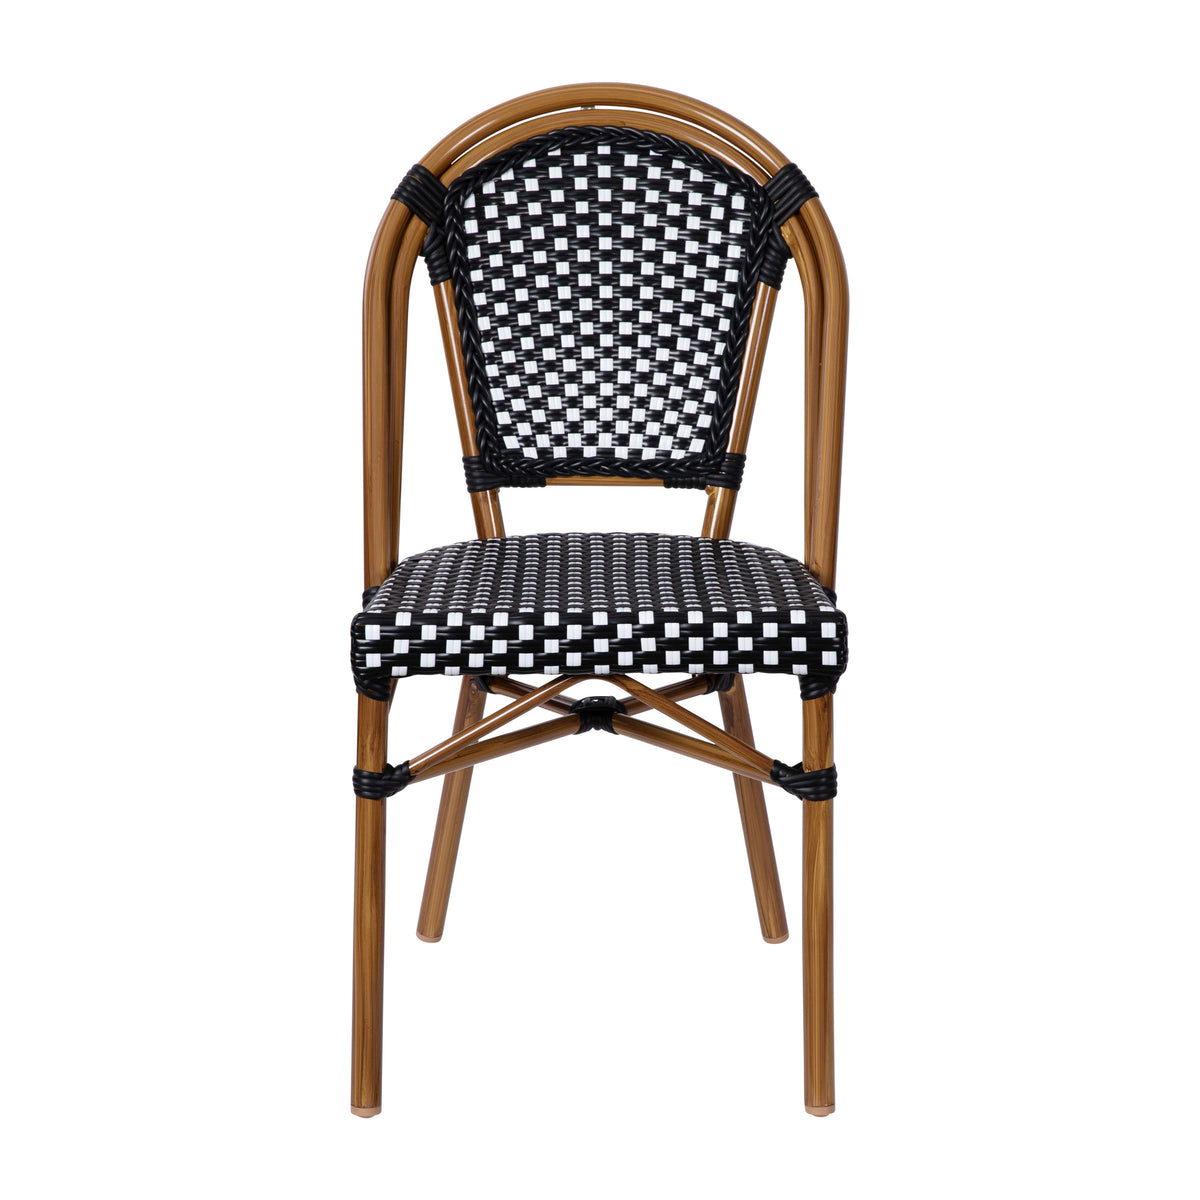 Black & White/Natural Frame |#| All-Weather Commercial Paris Chair with Bamboo Print Aluminum Frame-Black/White